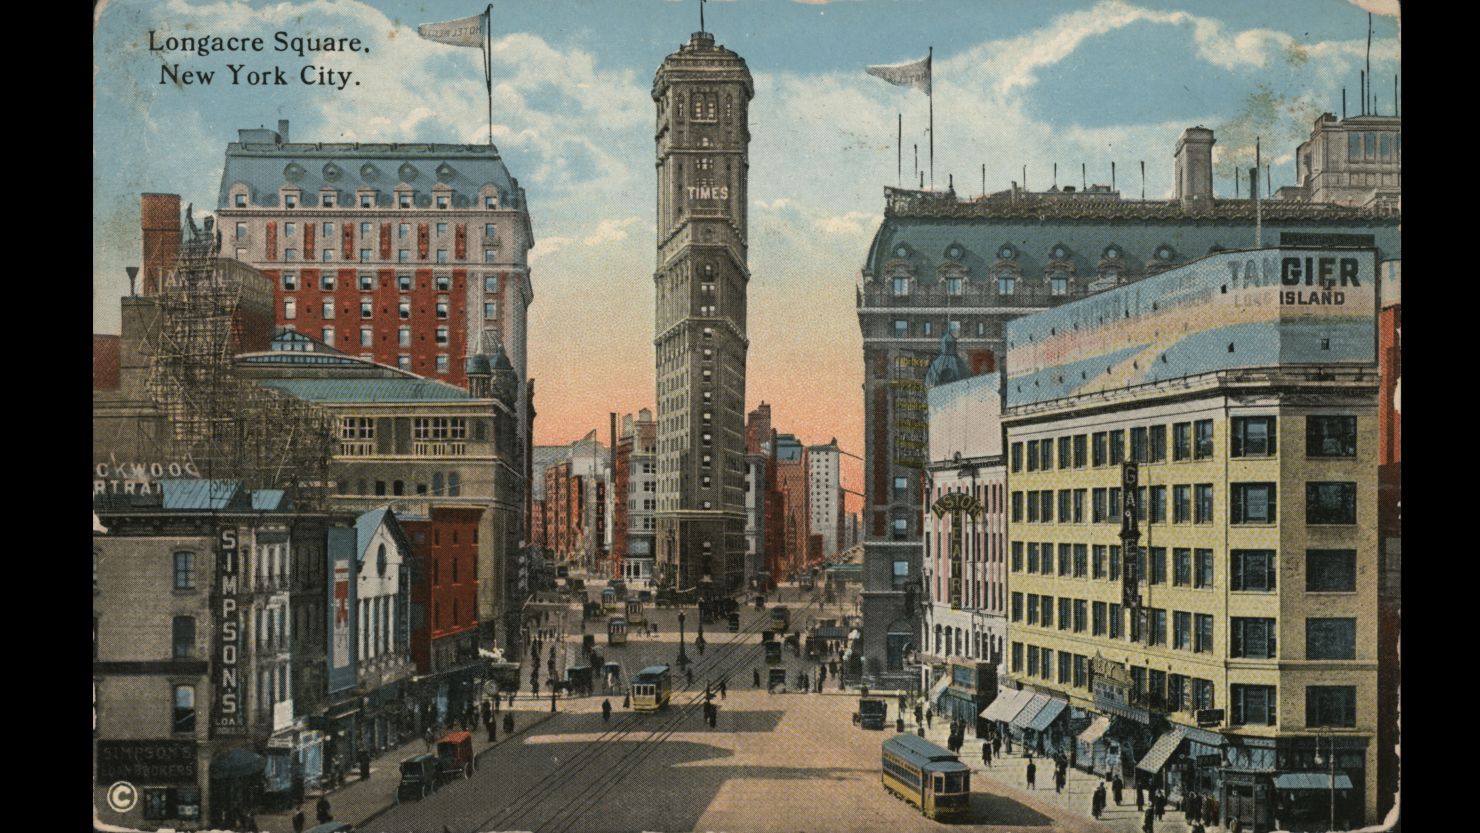 The Knickerbocker, left, opened in 1906 on Times Square. This postcard uses the square's former name.